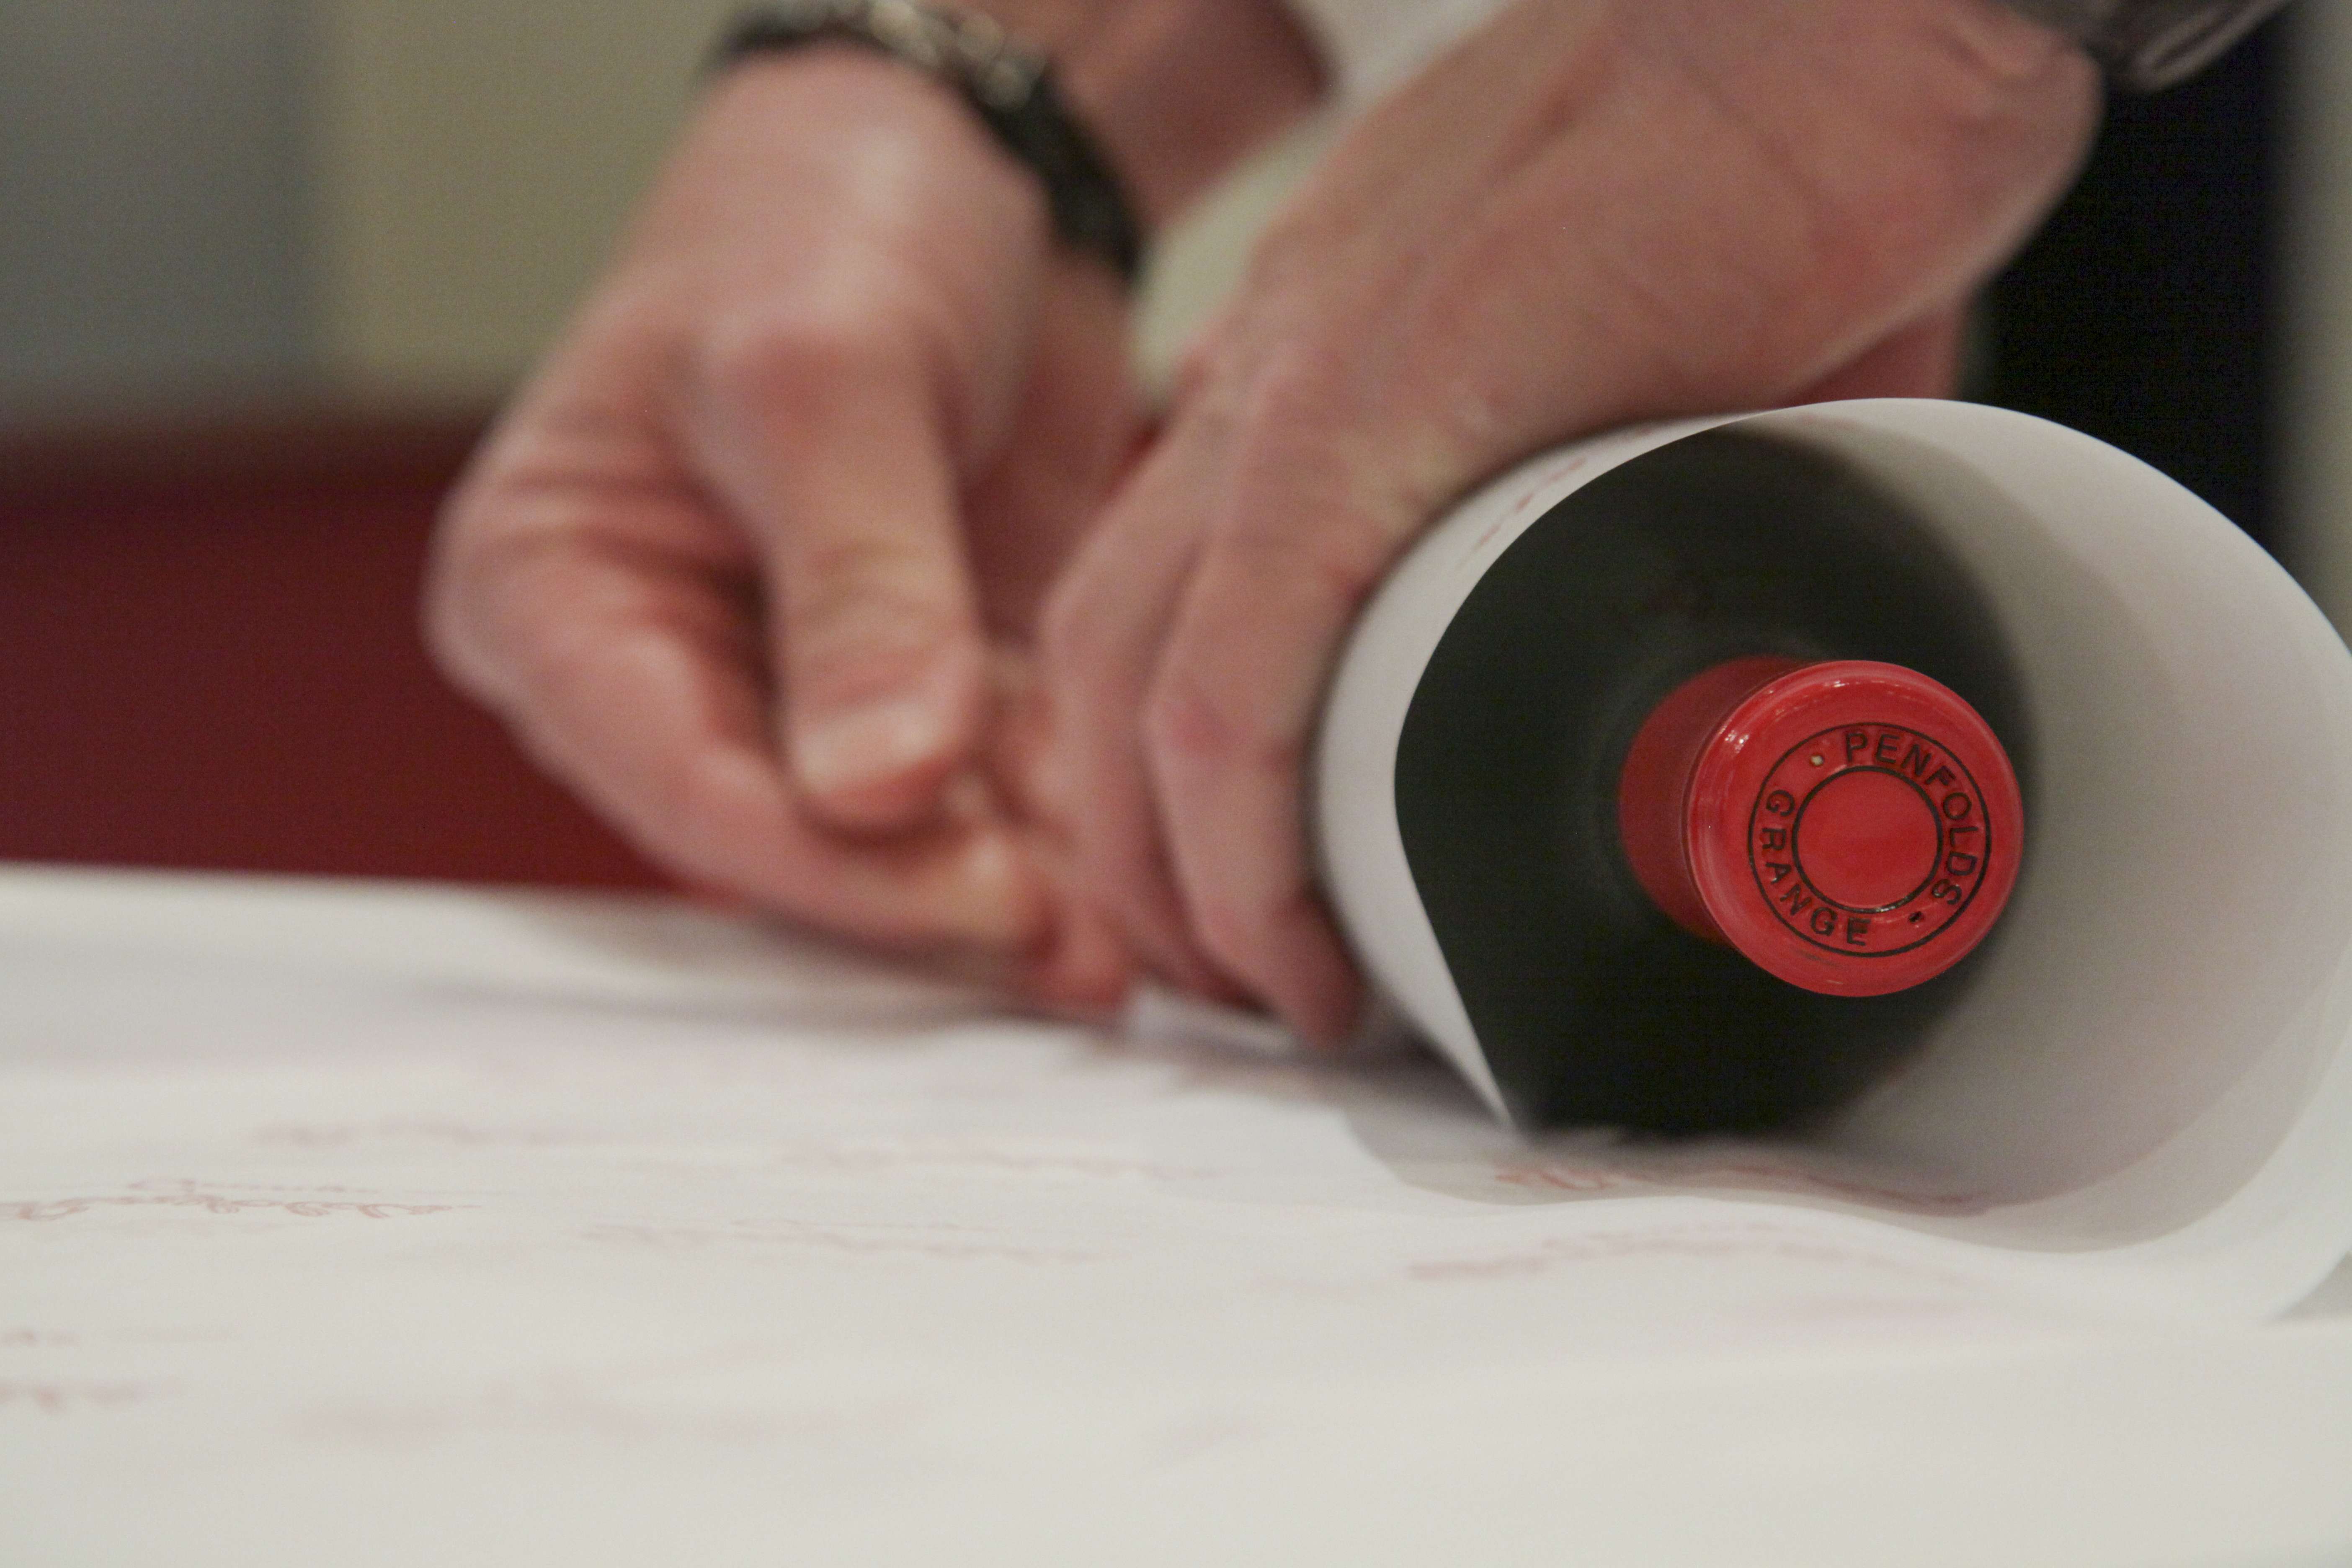 A recorked bottle of Penfolds wine being wrapped at a Penfolds recorking night in the US.